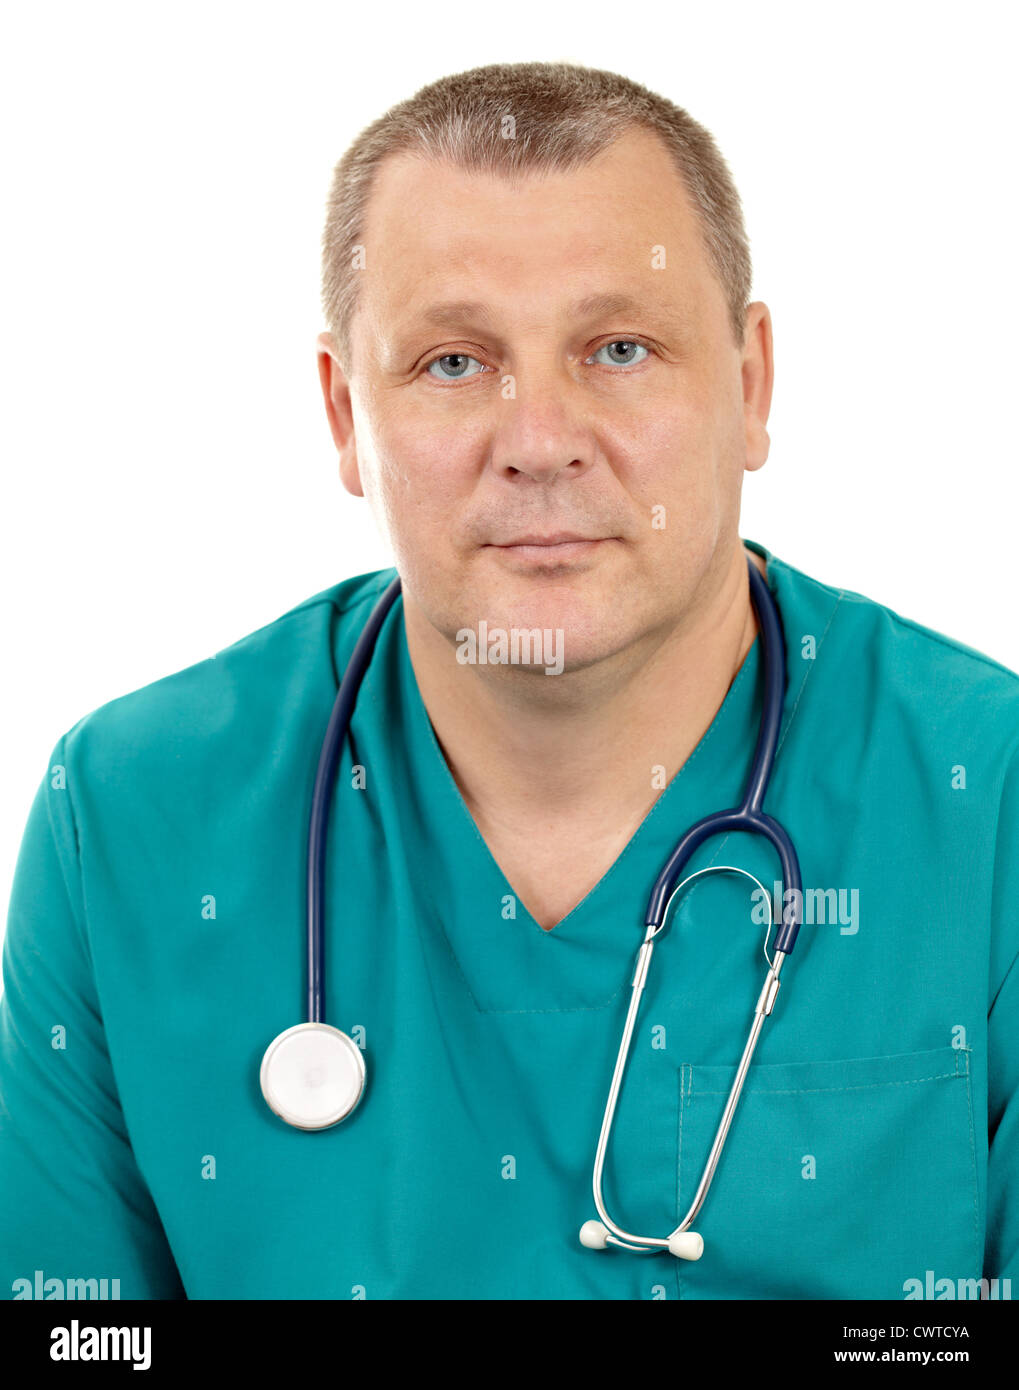 The portrait of a 50-year-old, blue-eyed doctor in a green smock with a stethoscope. Caucasian. Isolated on white. Stock Photo